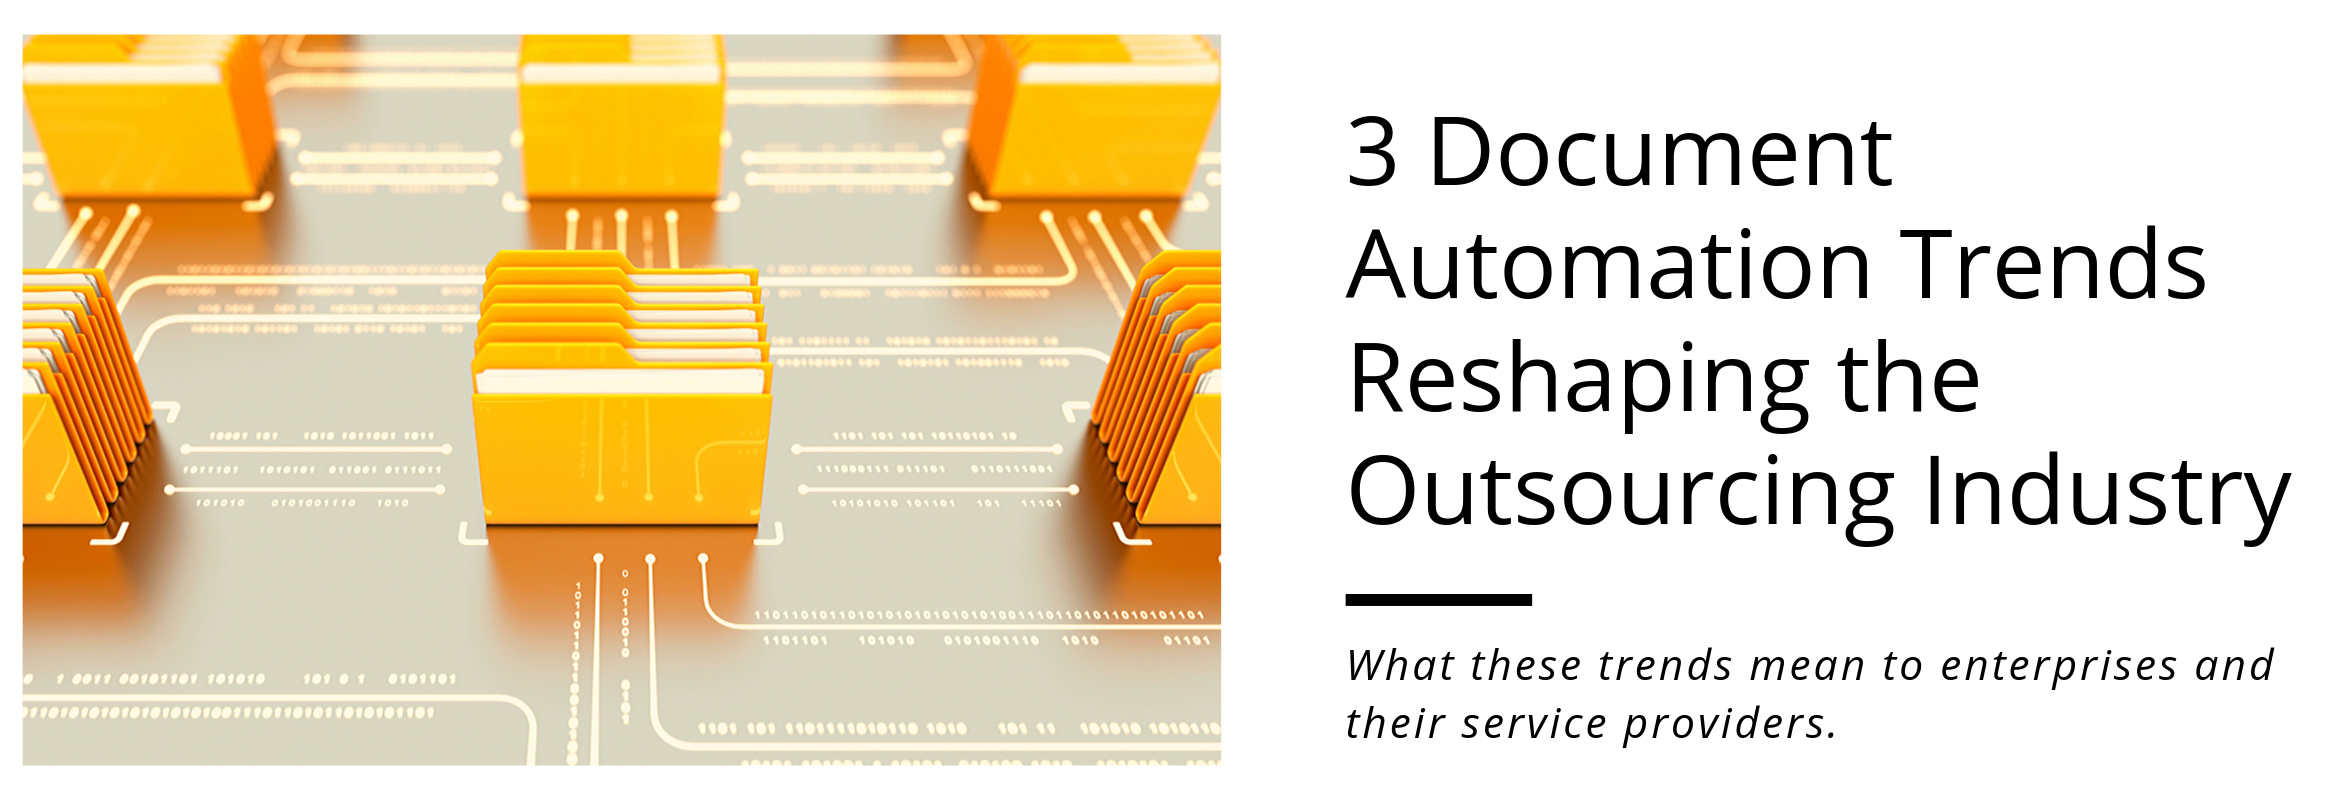 Document automation trends in outsourcing